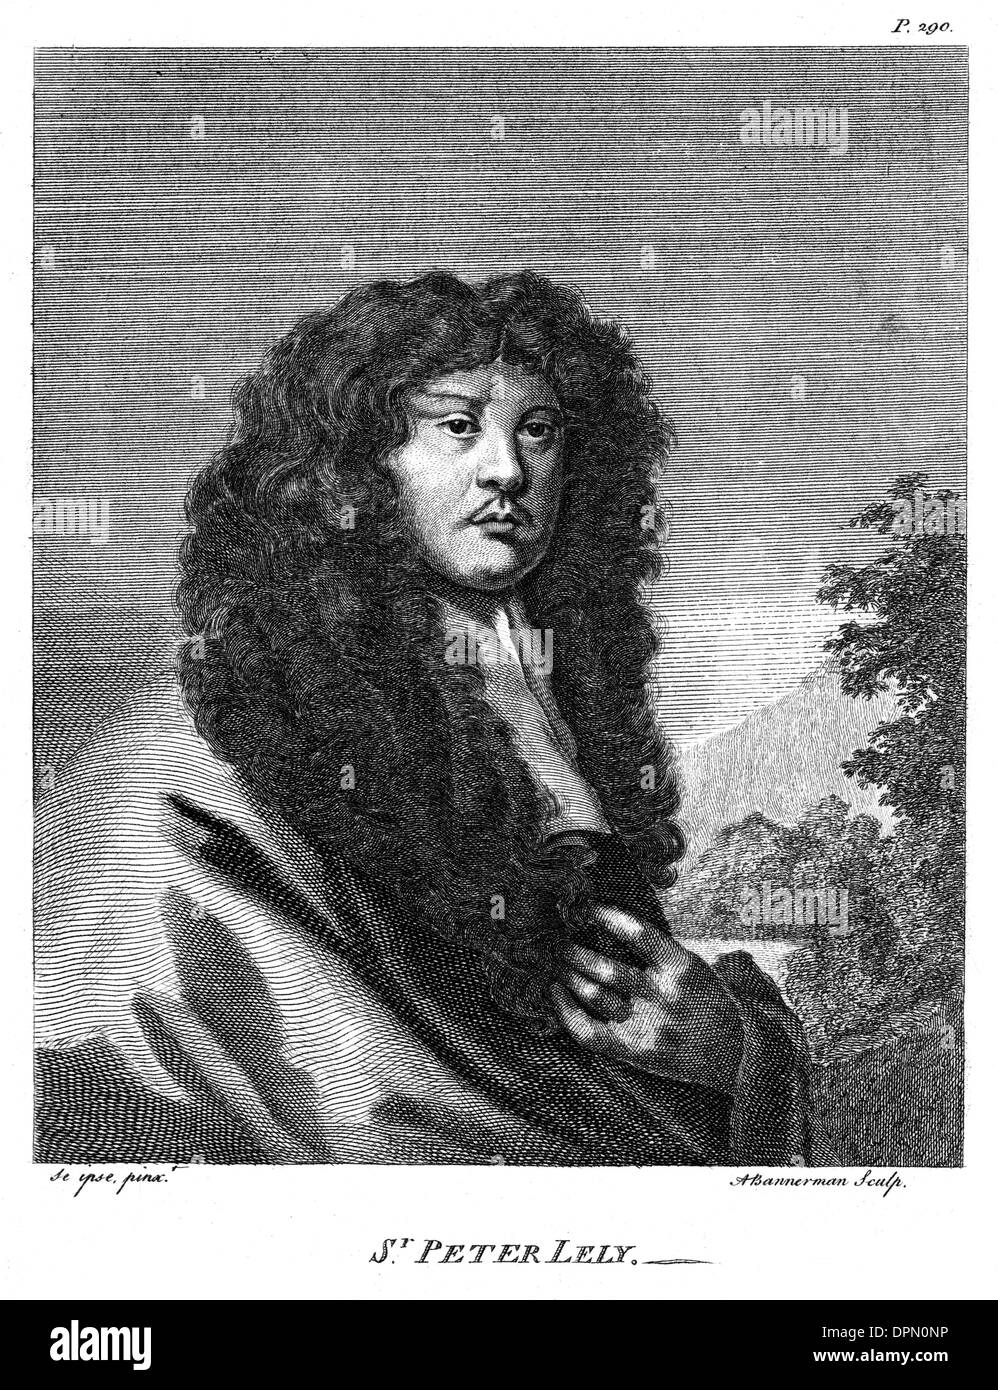 Sir peter lely Cut Out Stock Images & Pictures - Alamy